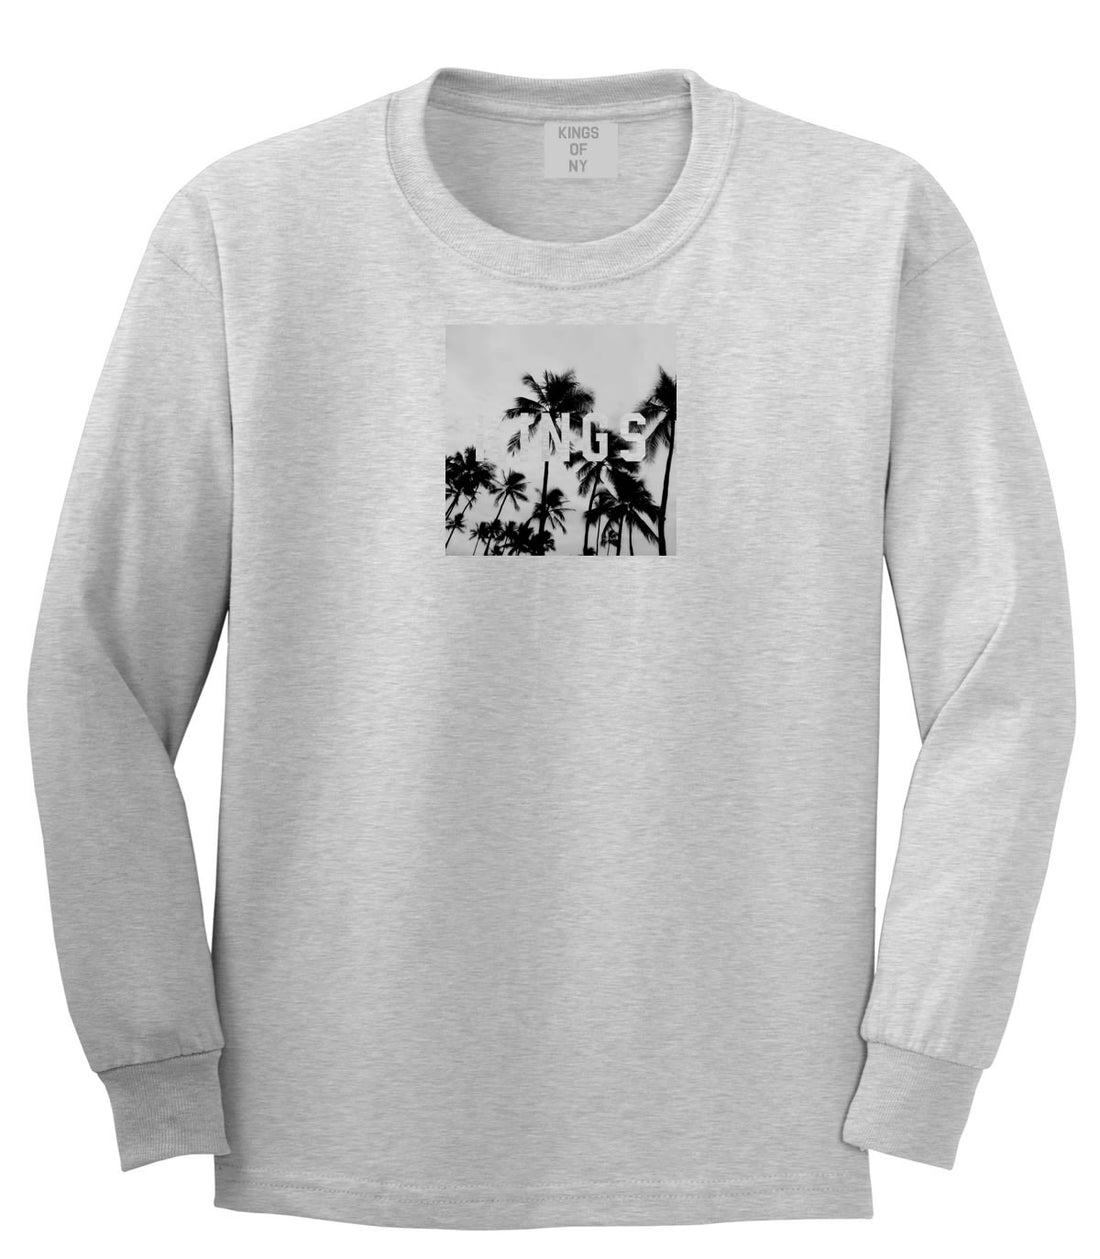 Kings Palm Trees Logo Long Sleeve T-Shirt in Grey By Kings Of NY